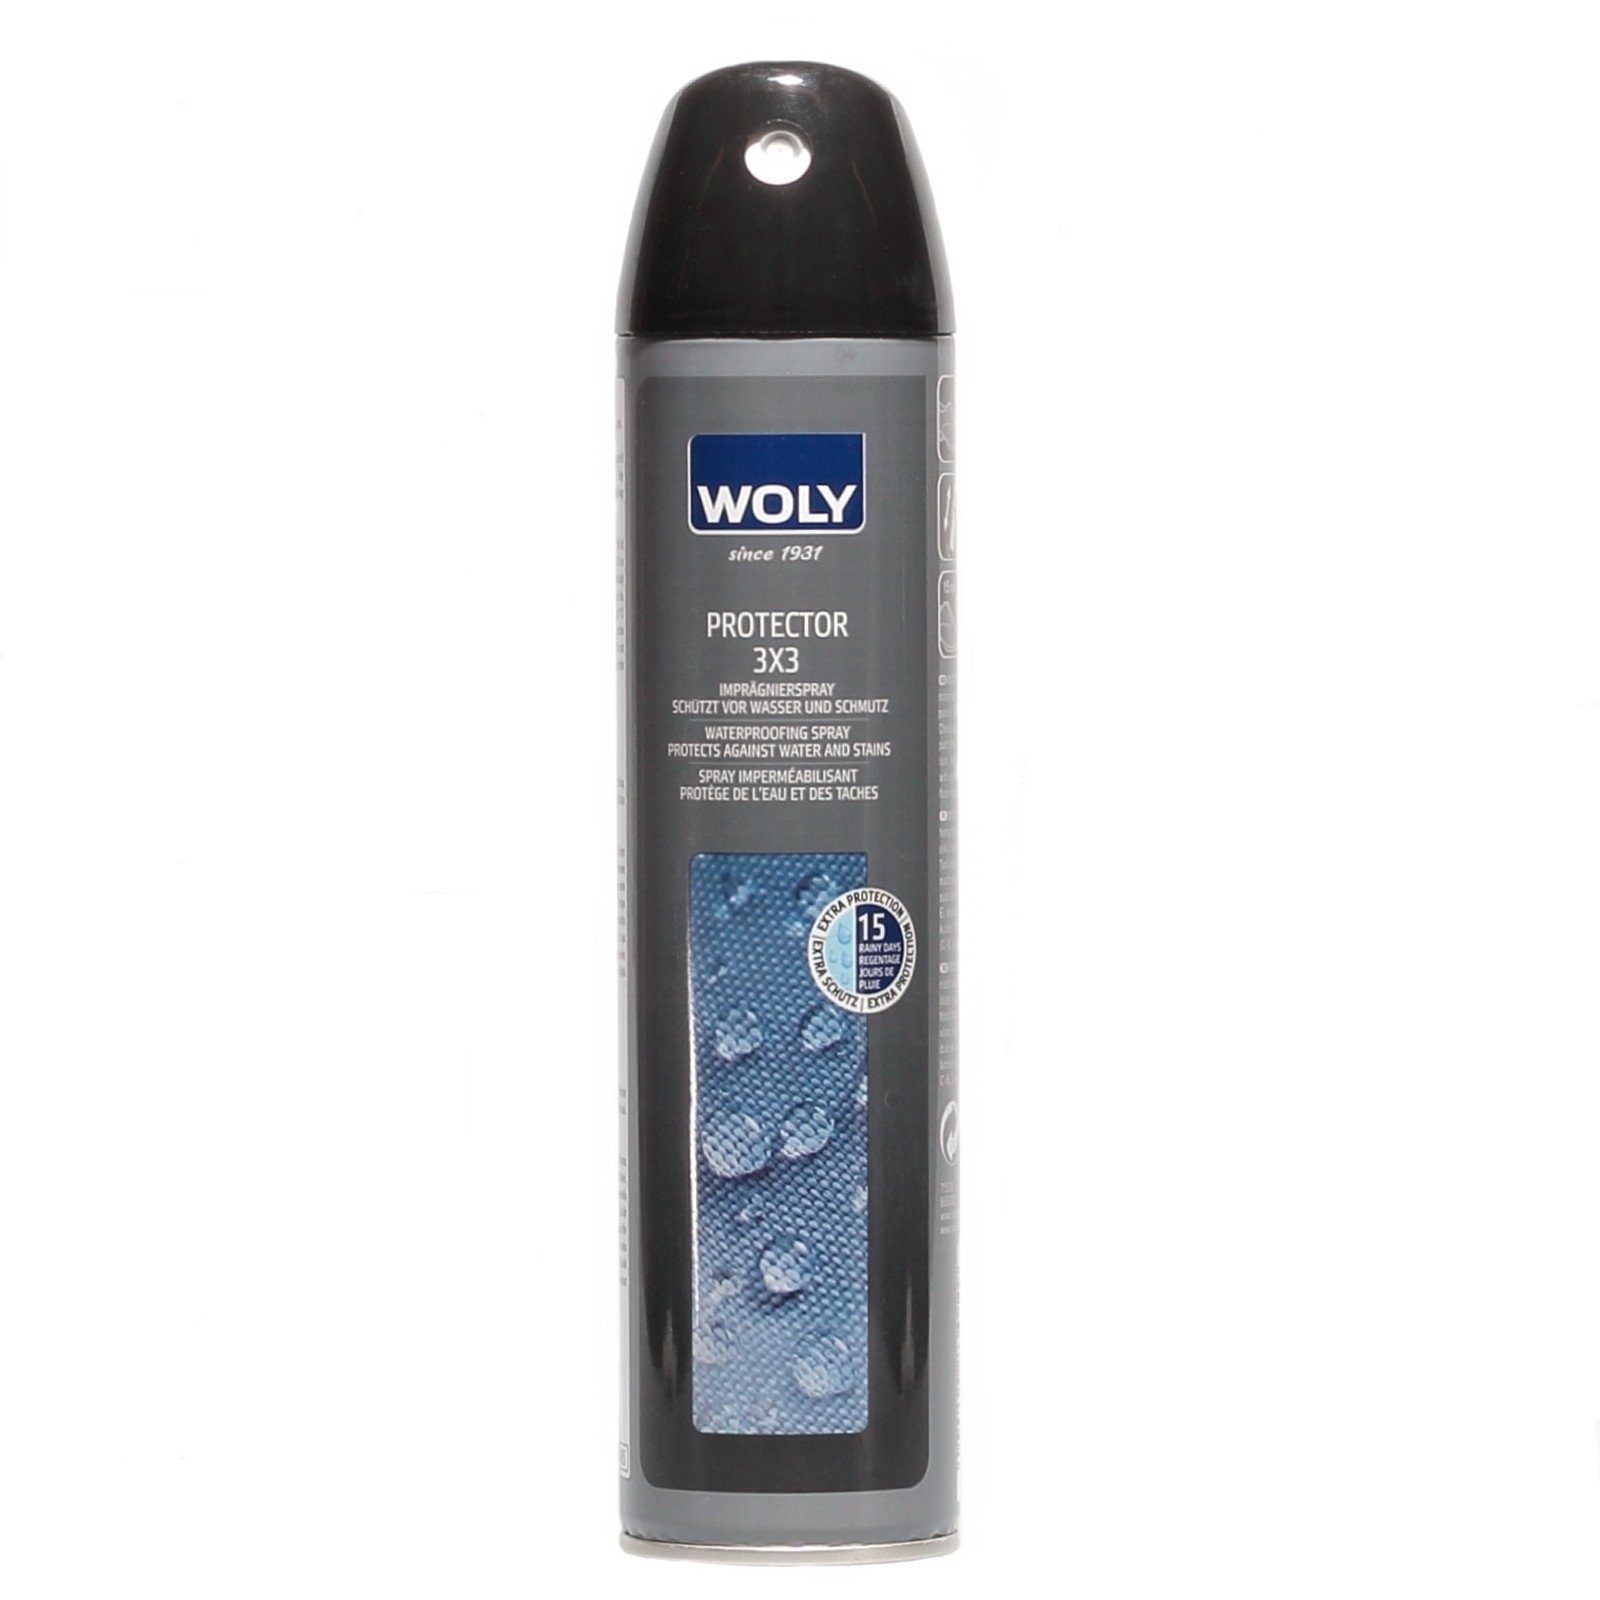 Woly Protector 3x3 spray 300ml